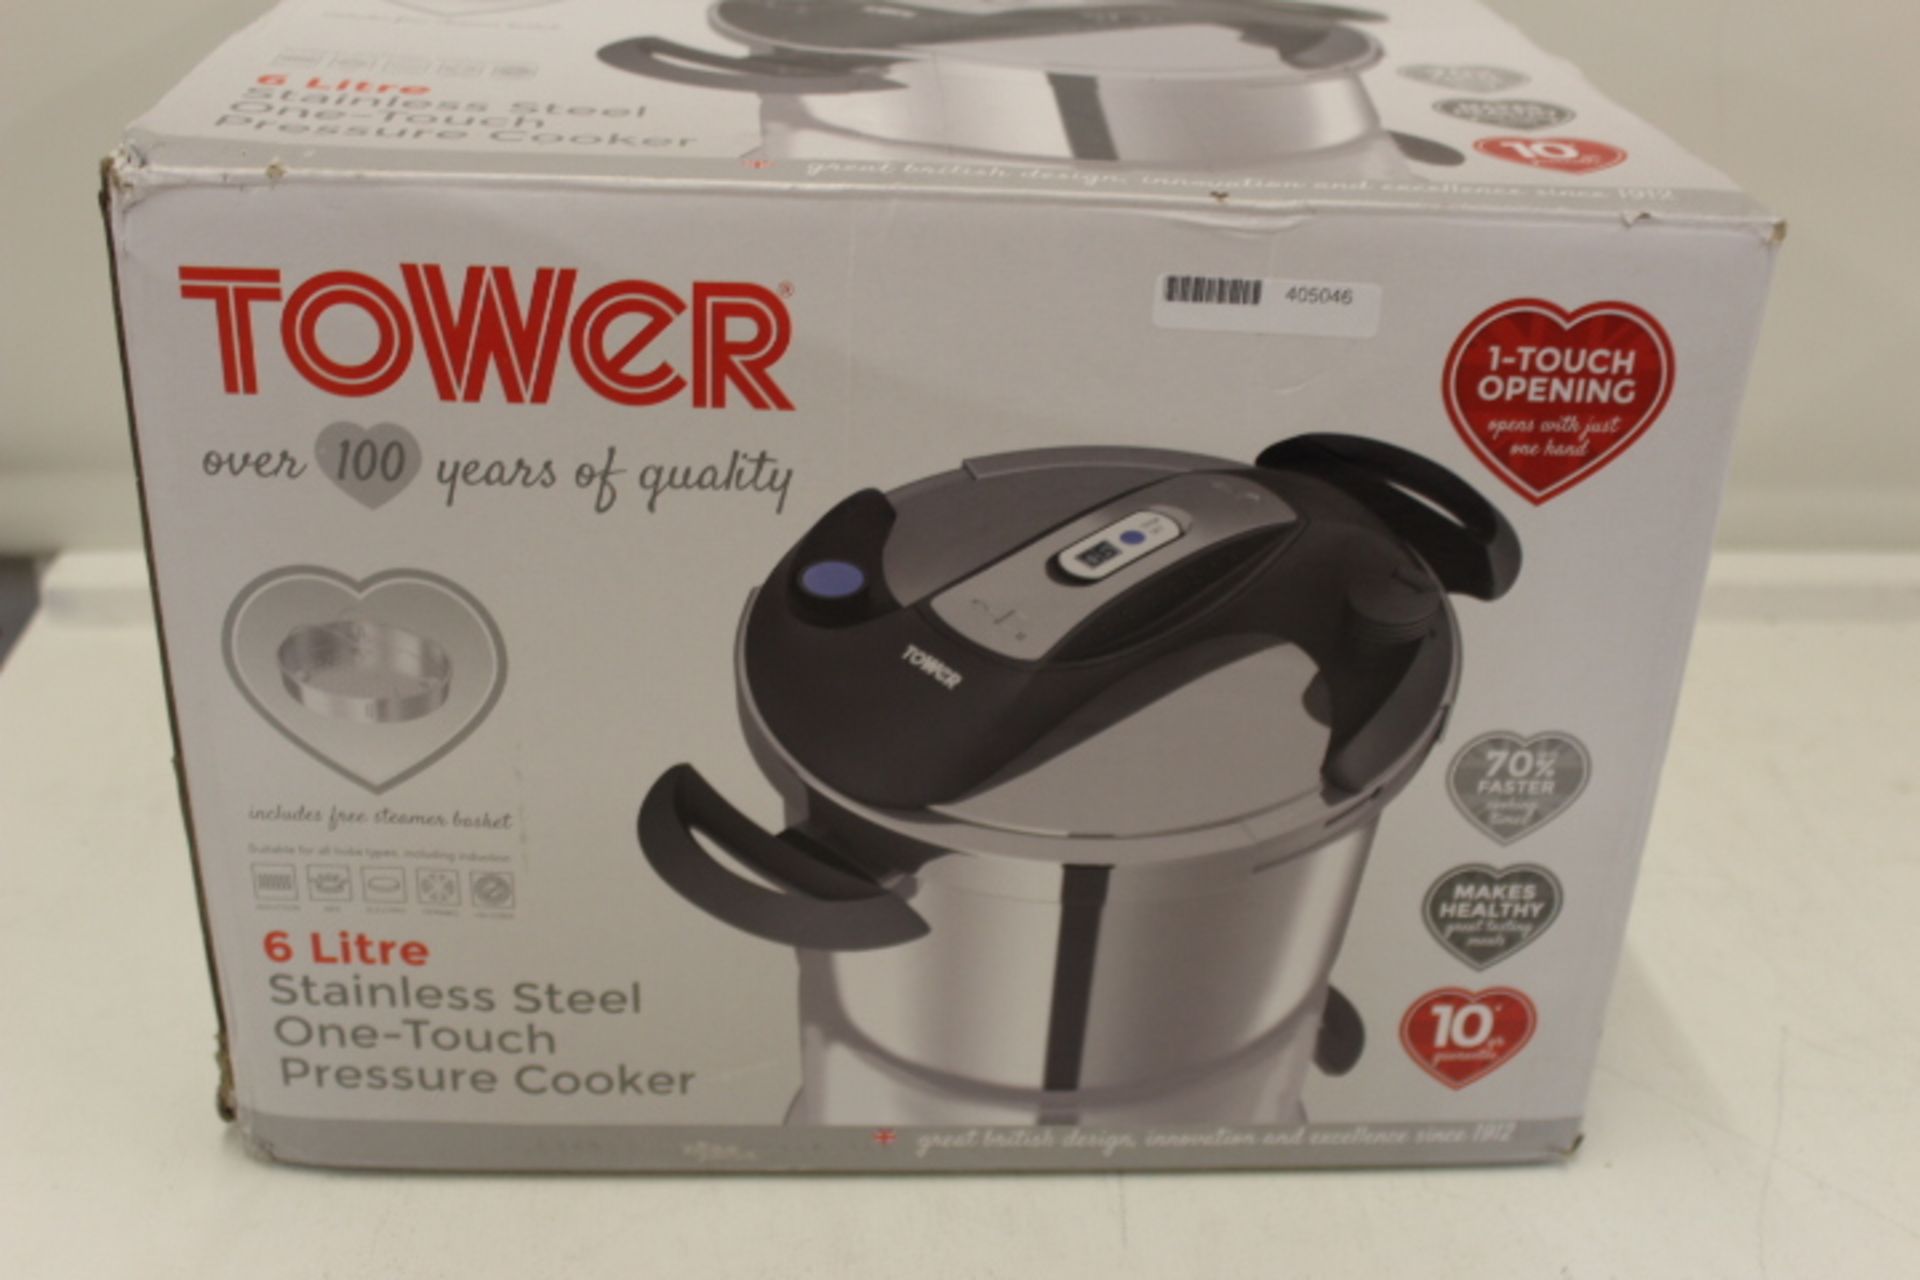 V Grade U Tower 6 Litre S/S One Touch Pressure Cooker